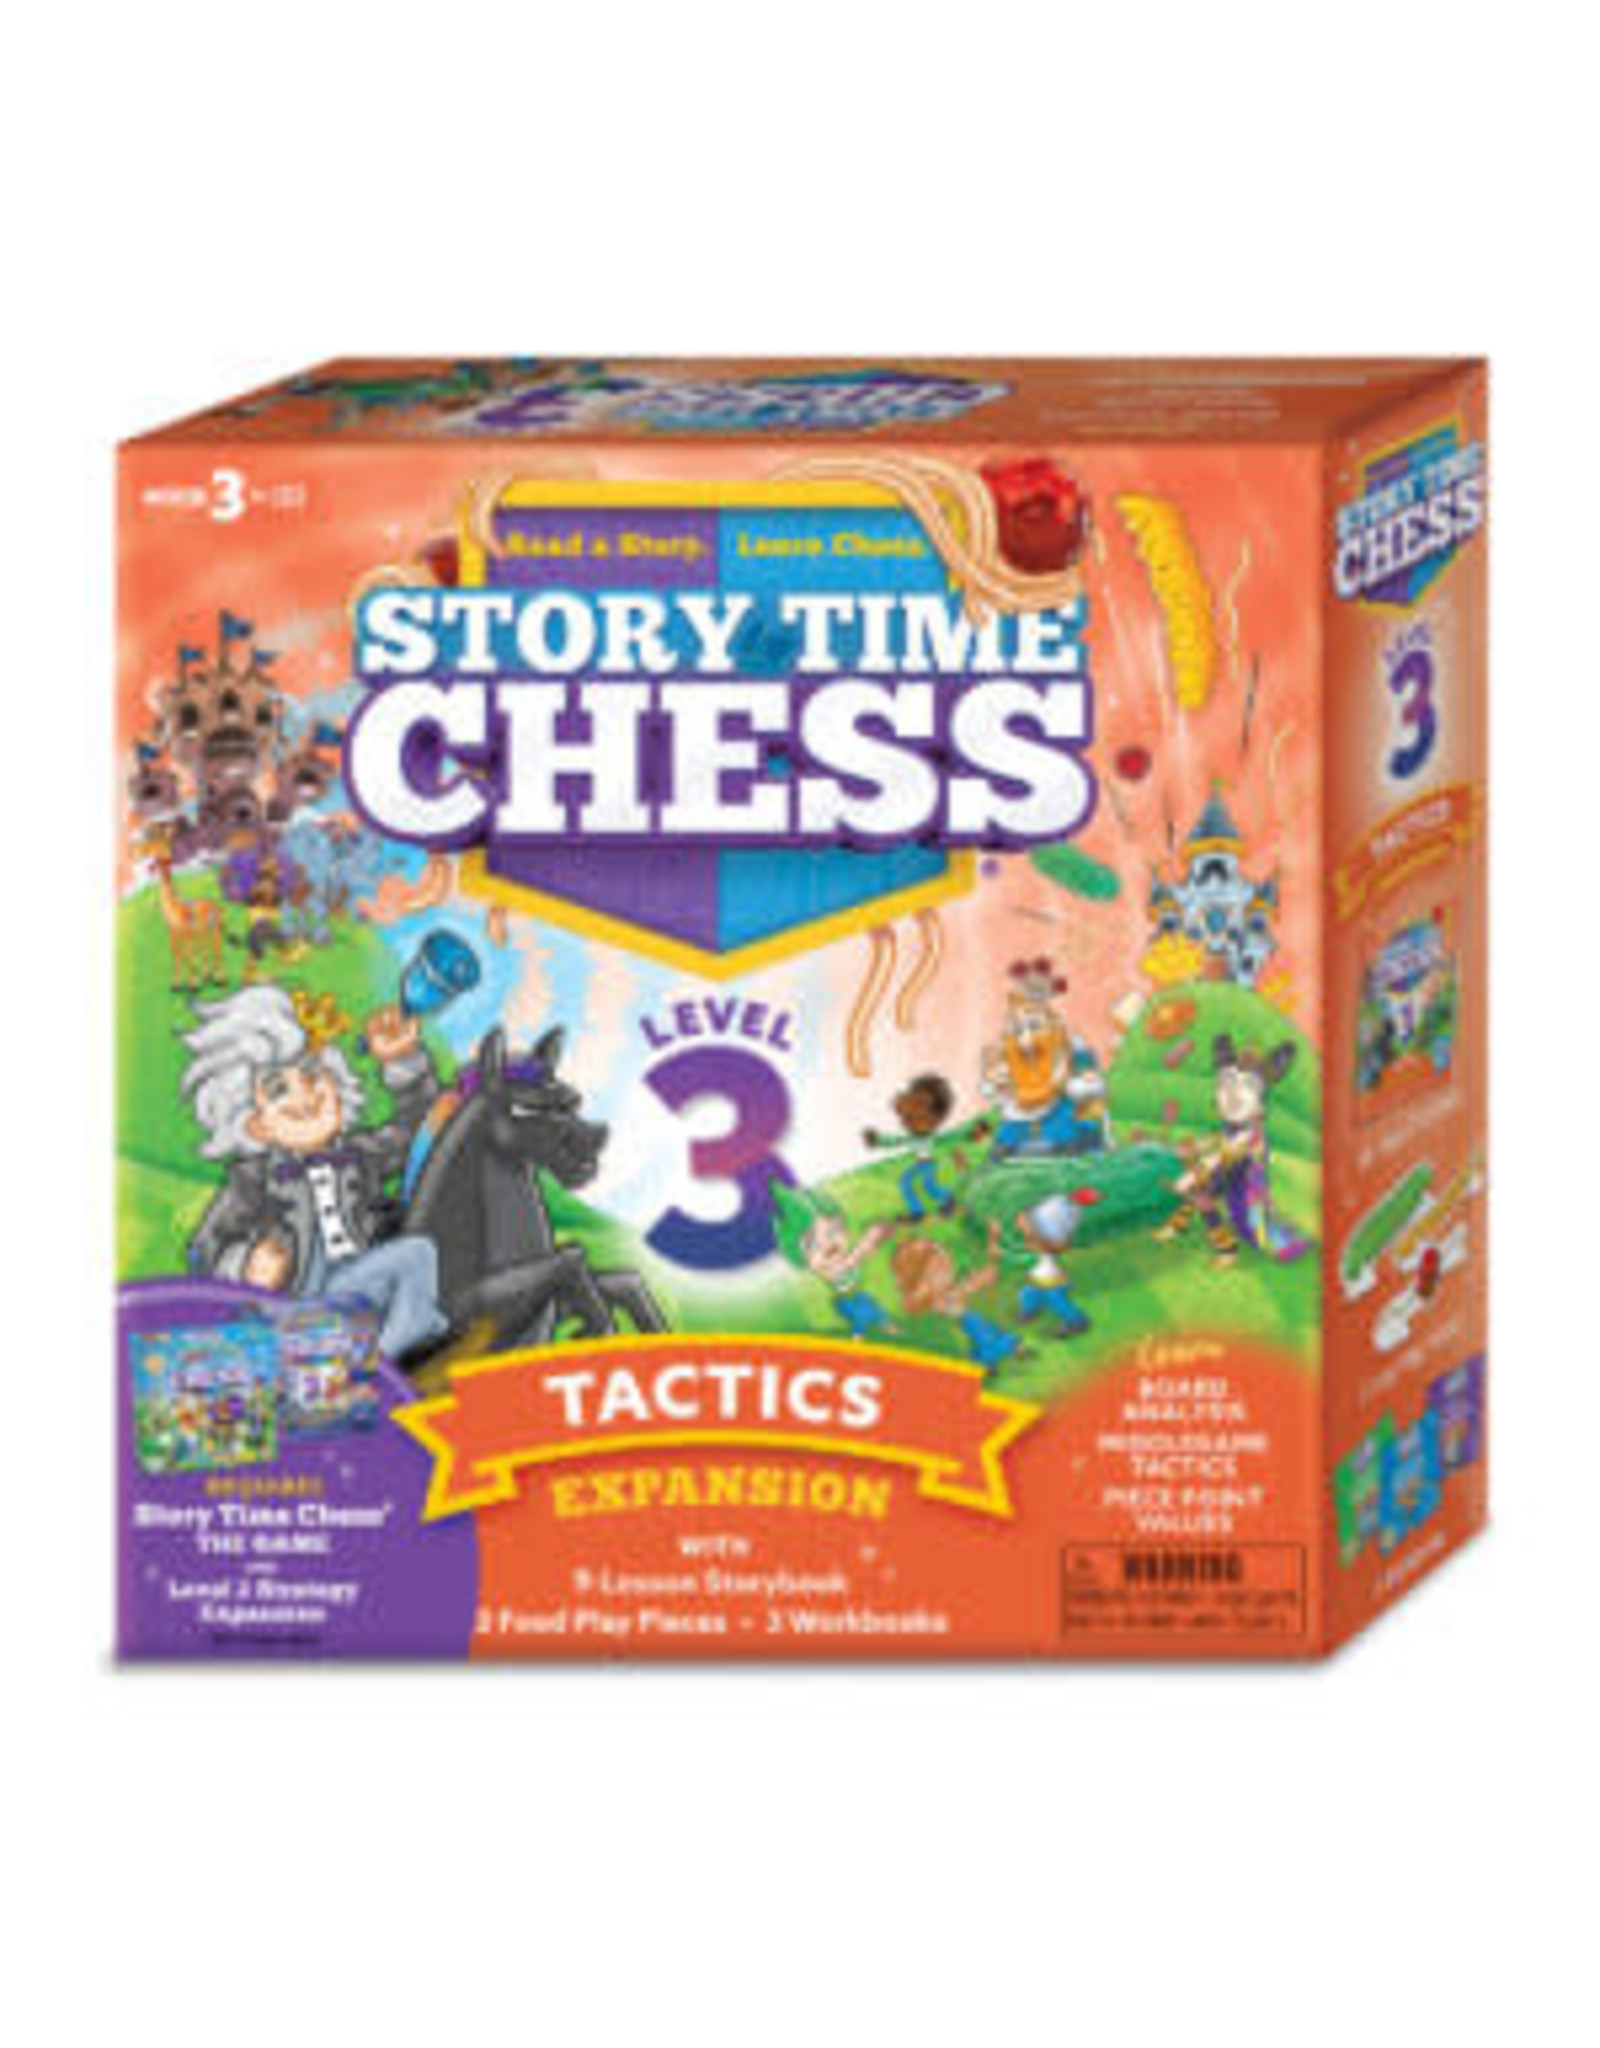 Story Time Chess: Level 3 Tactics Expansion